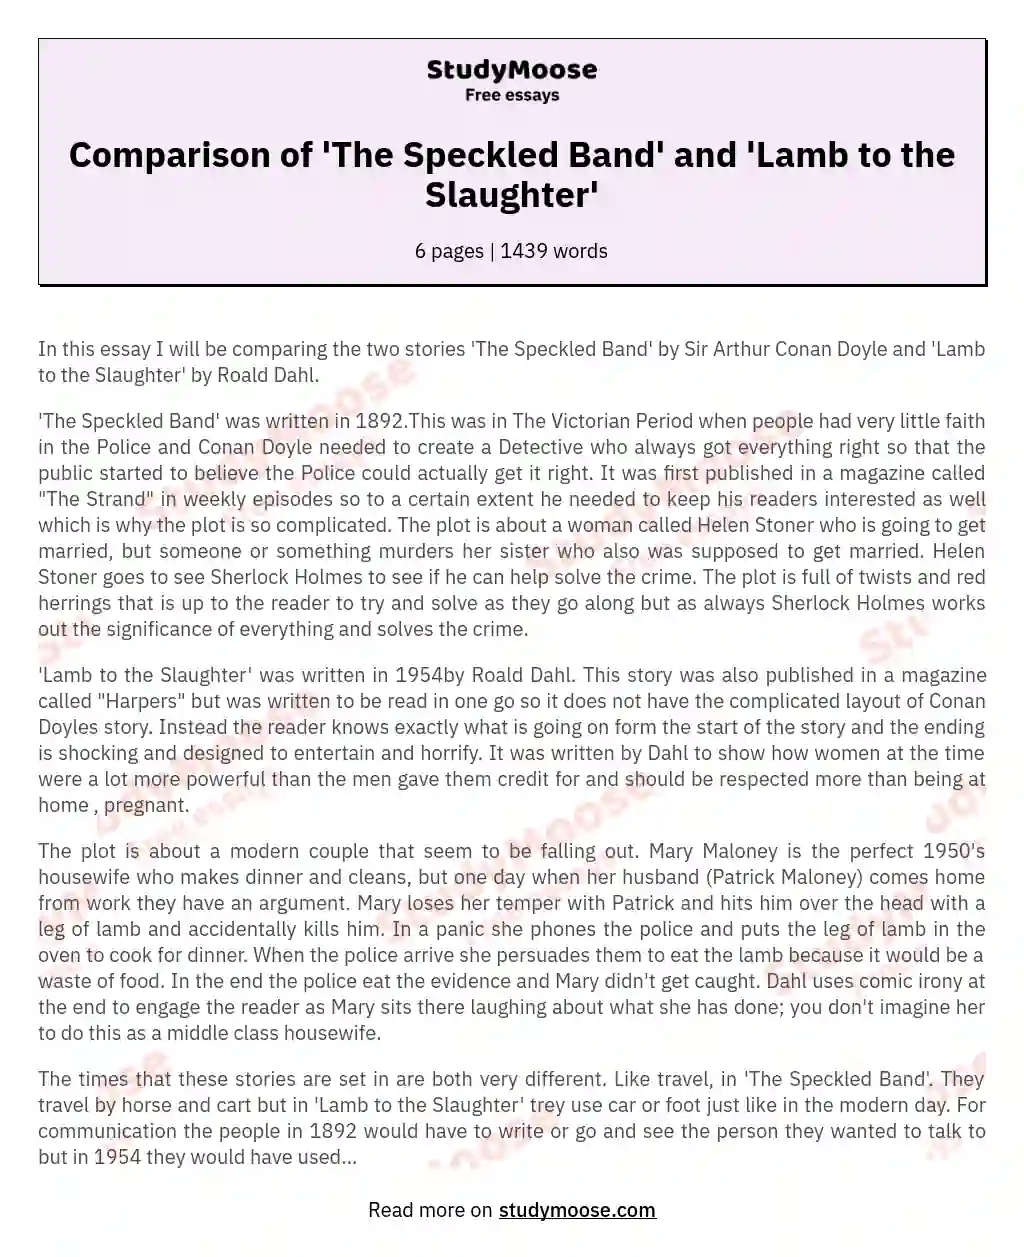 Comparison of 'The Speckled Band' and 'Lamb to the Slaughter'